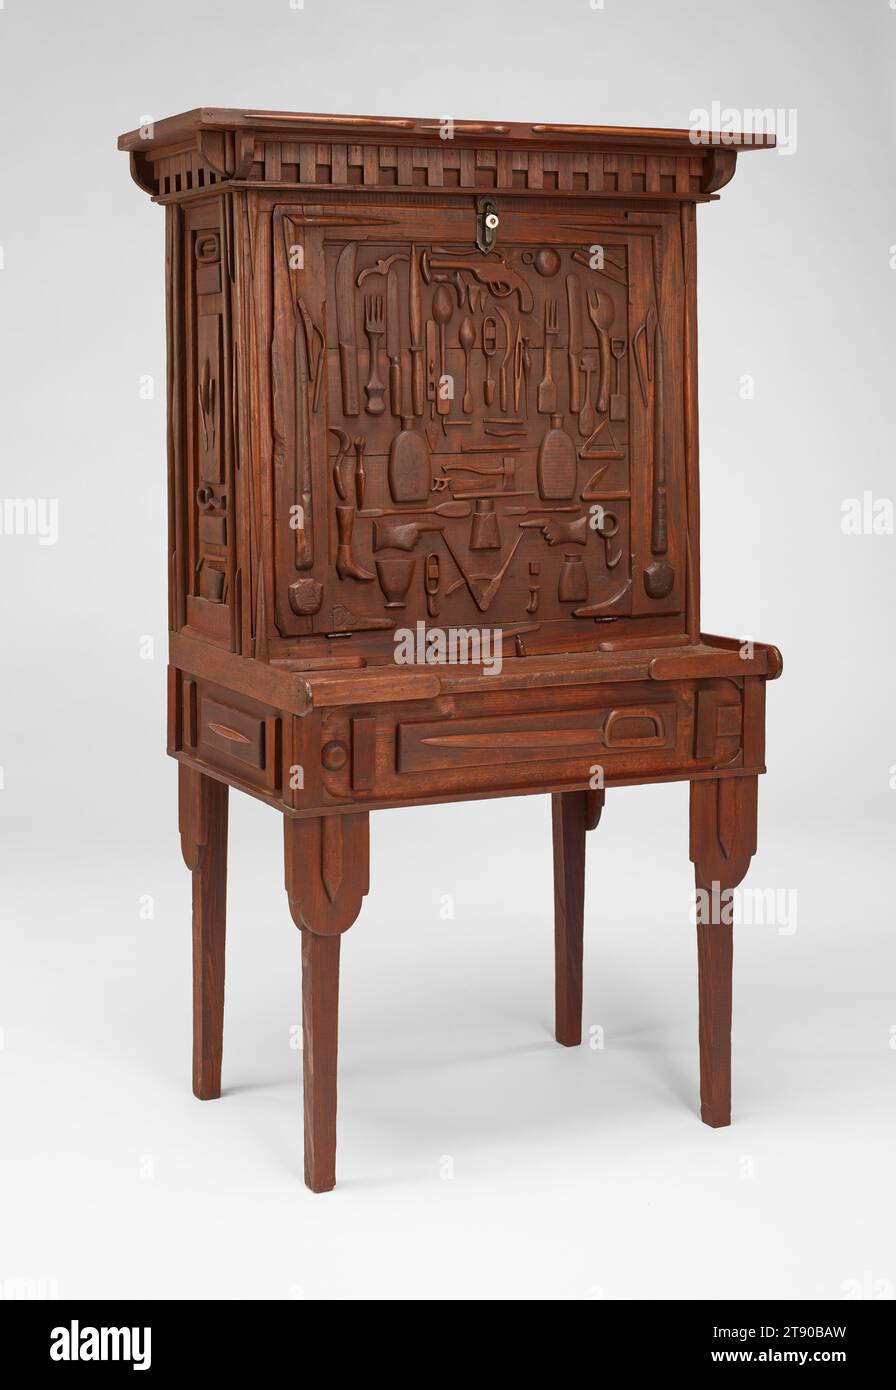 Writing desk, c. 1870, Attributed to William Howard, American (born Africa), American (born Africa about 1805) active until c. 1870, 60 3/4 x 29 7/8 x 23 11/16 in. (154.31 x 75.88 x 60.17 cm), Yellow pine, tobacco box and cotton crate wood, United States, 19th century, William Howard was born in Africa and lived and worked at Kirkwood Plantation in Madison County, Mississippi, first as an enslaved man and then, after the Civil War (1861–65), as a free man. This desk was handed down through an African American family, along with the story of William Howard as its maker Stock Photo